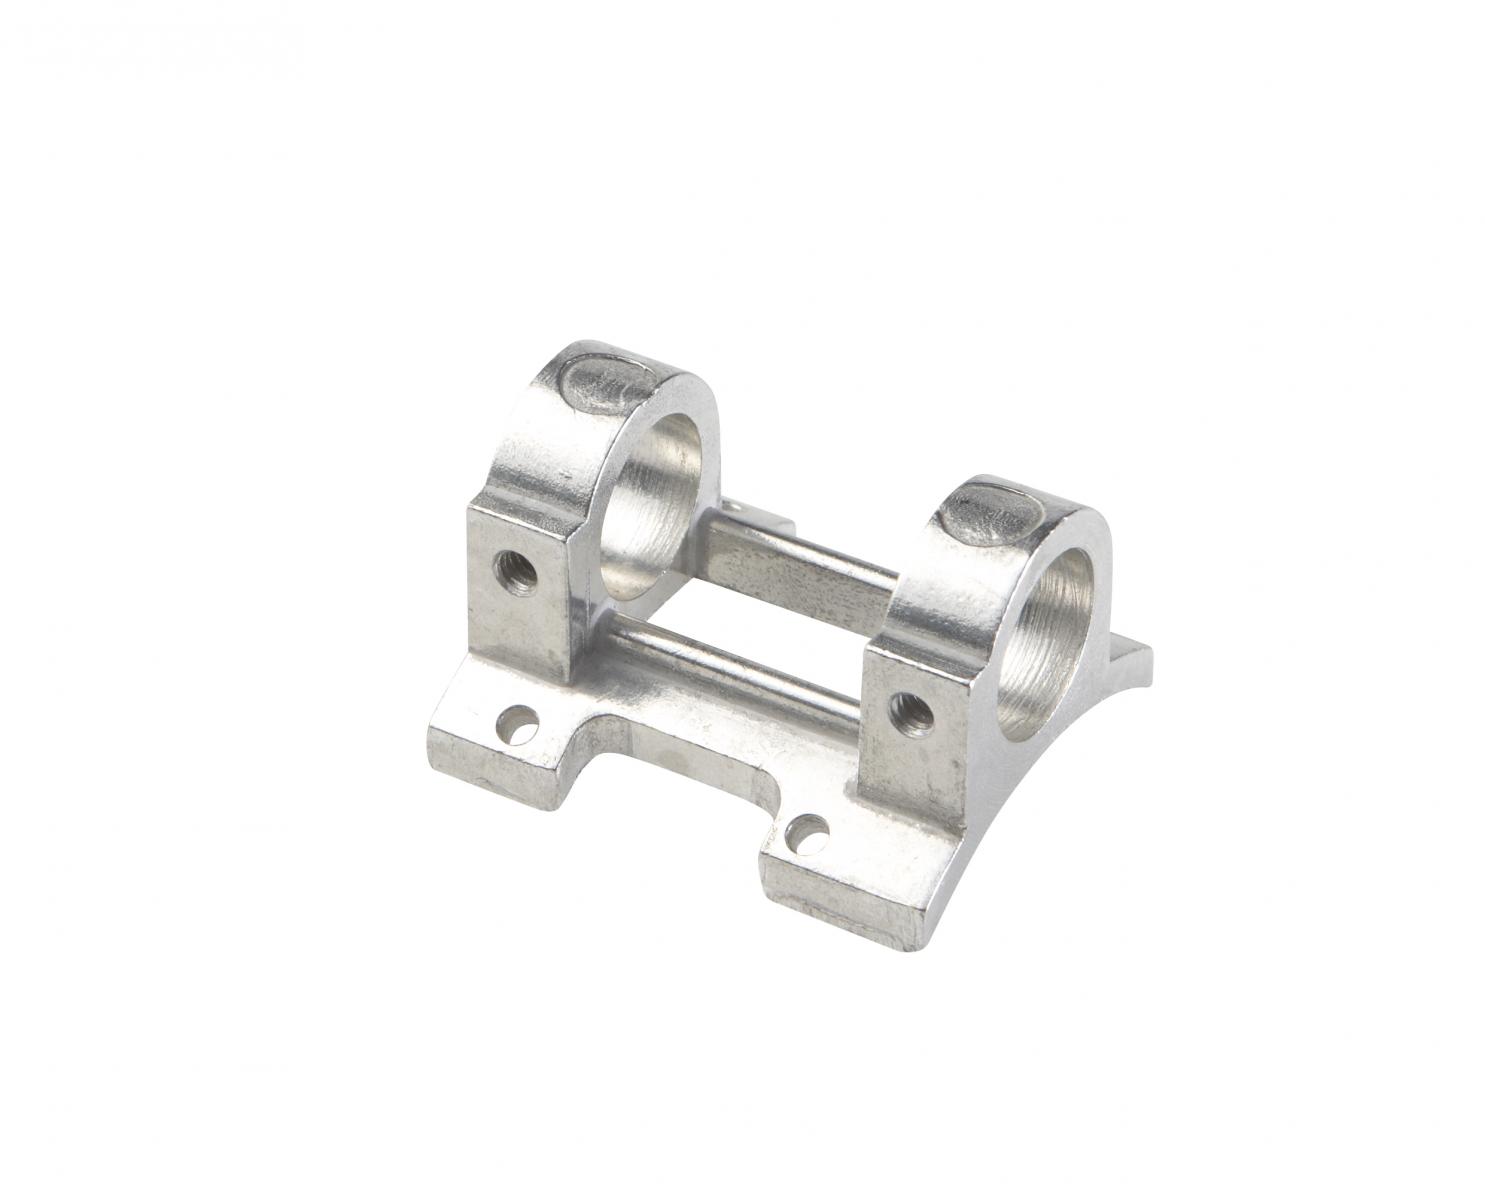 Drywall Master Extension Arm Bracket. Part number T-117